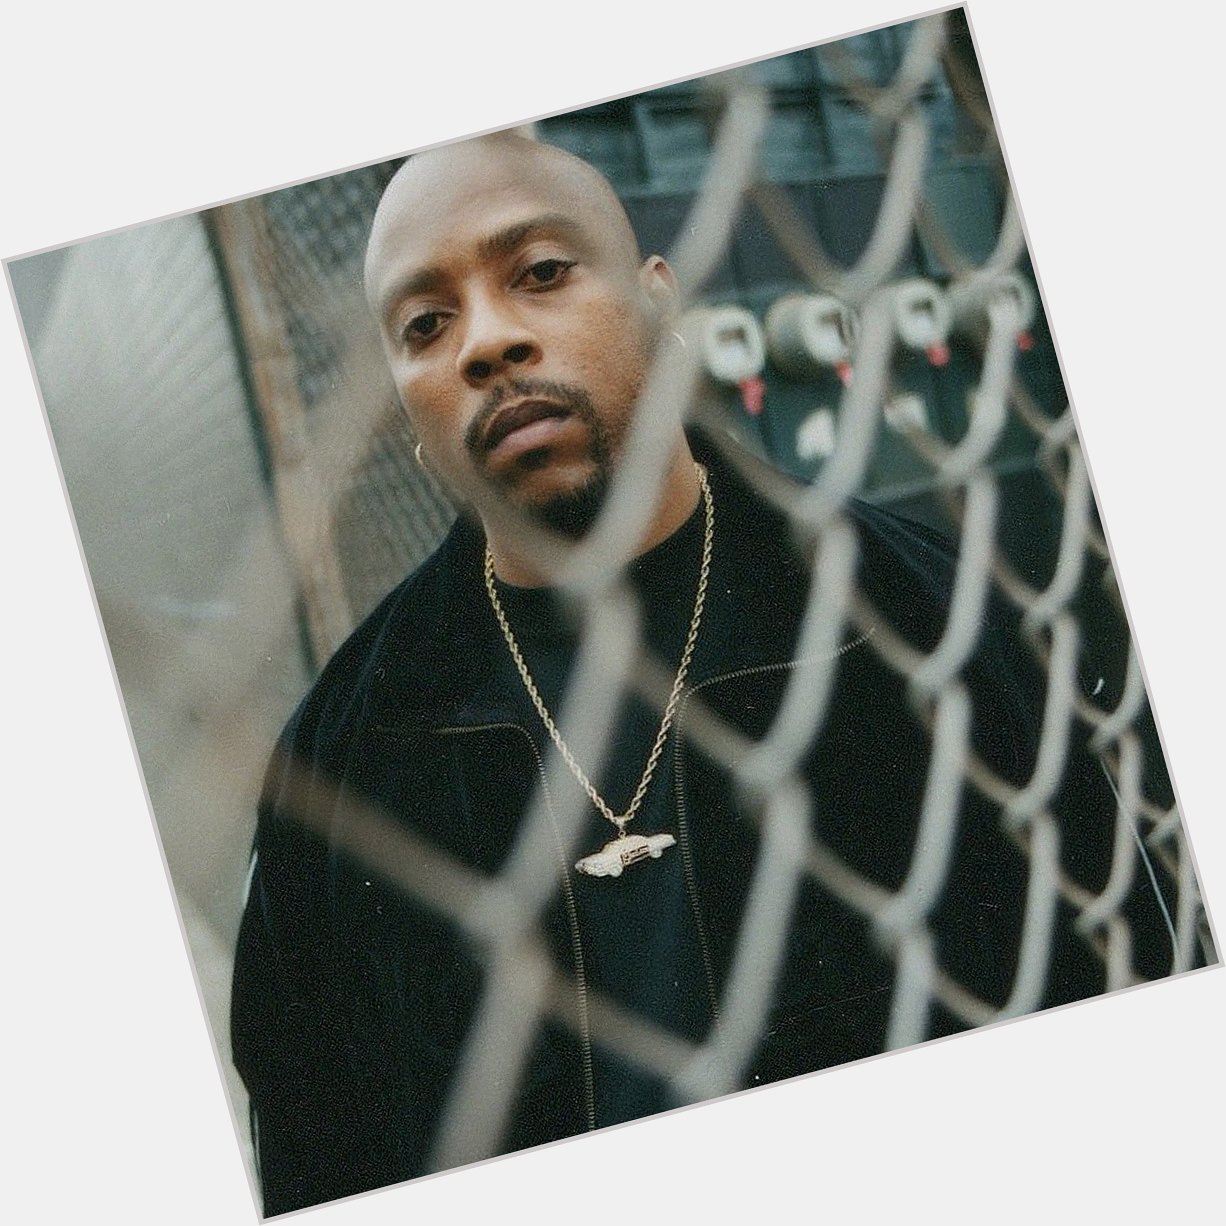 HAPPY BIRTHDAY TO THE TRIPLE OG NATE DOGG..... REST IN PEACE! <3 